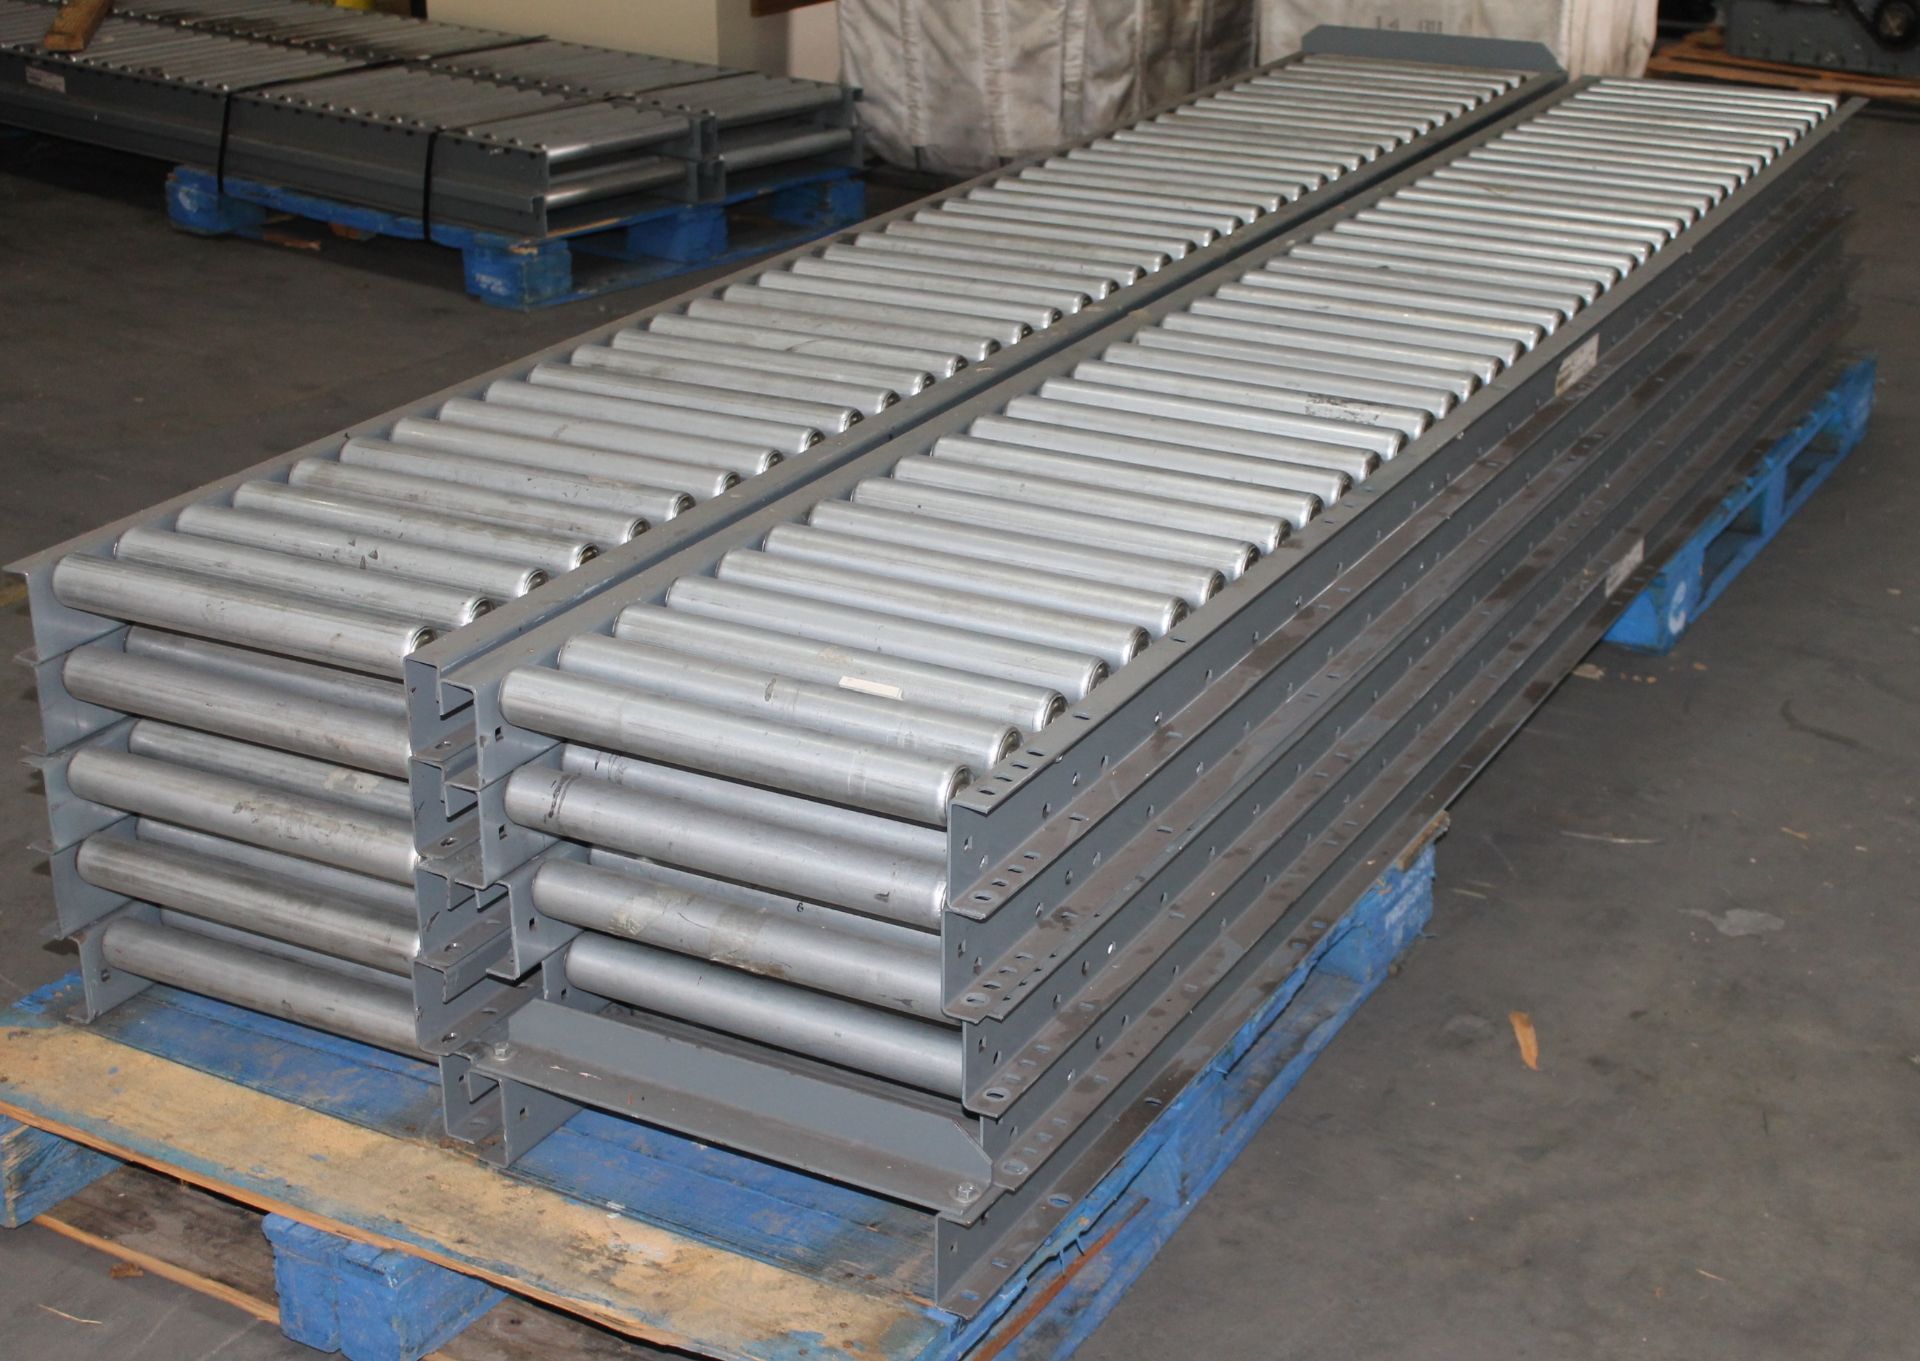 50 FT OF 18" GRAVITY ROLLER CONVEYOR, 1.9" ROLLER, 3" CENTER, PART NO: 915510MA - Image 4 of 4